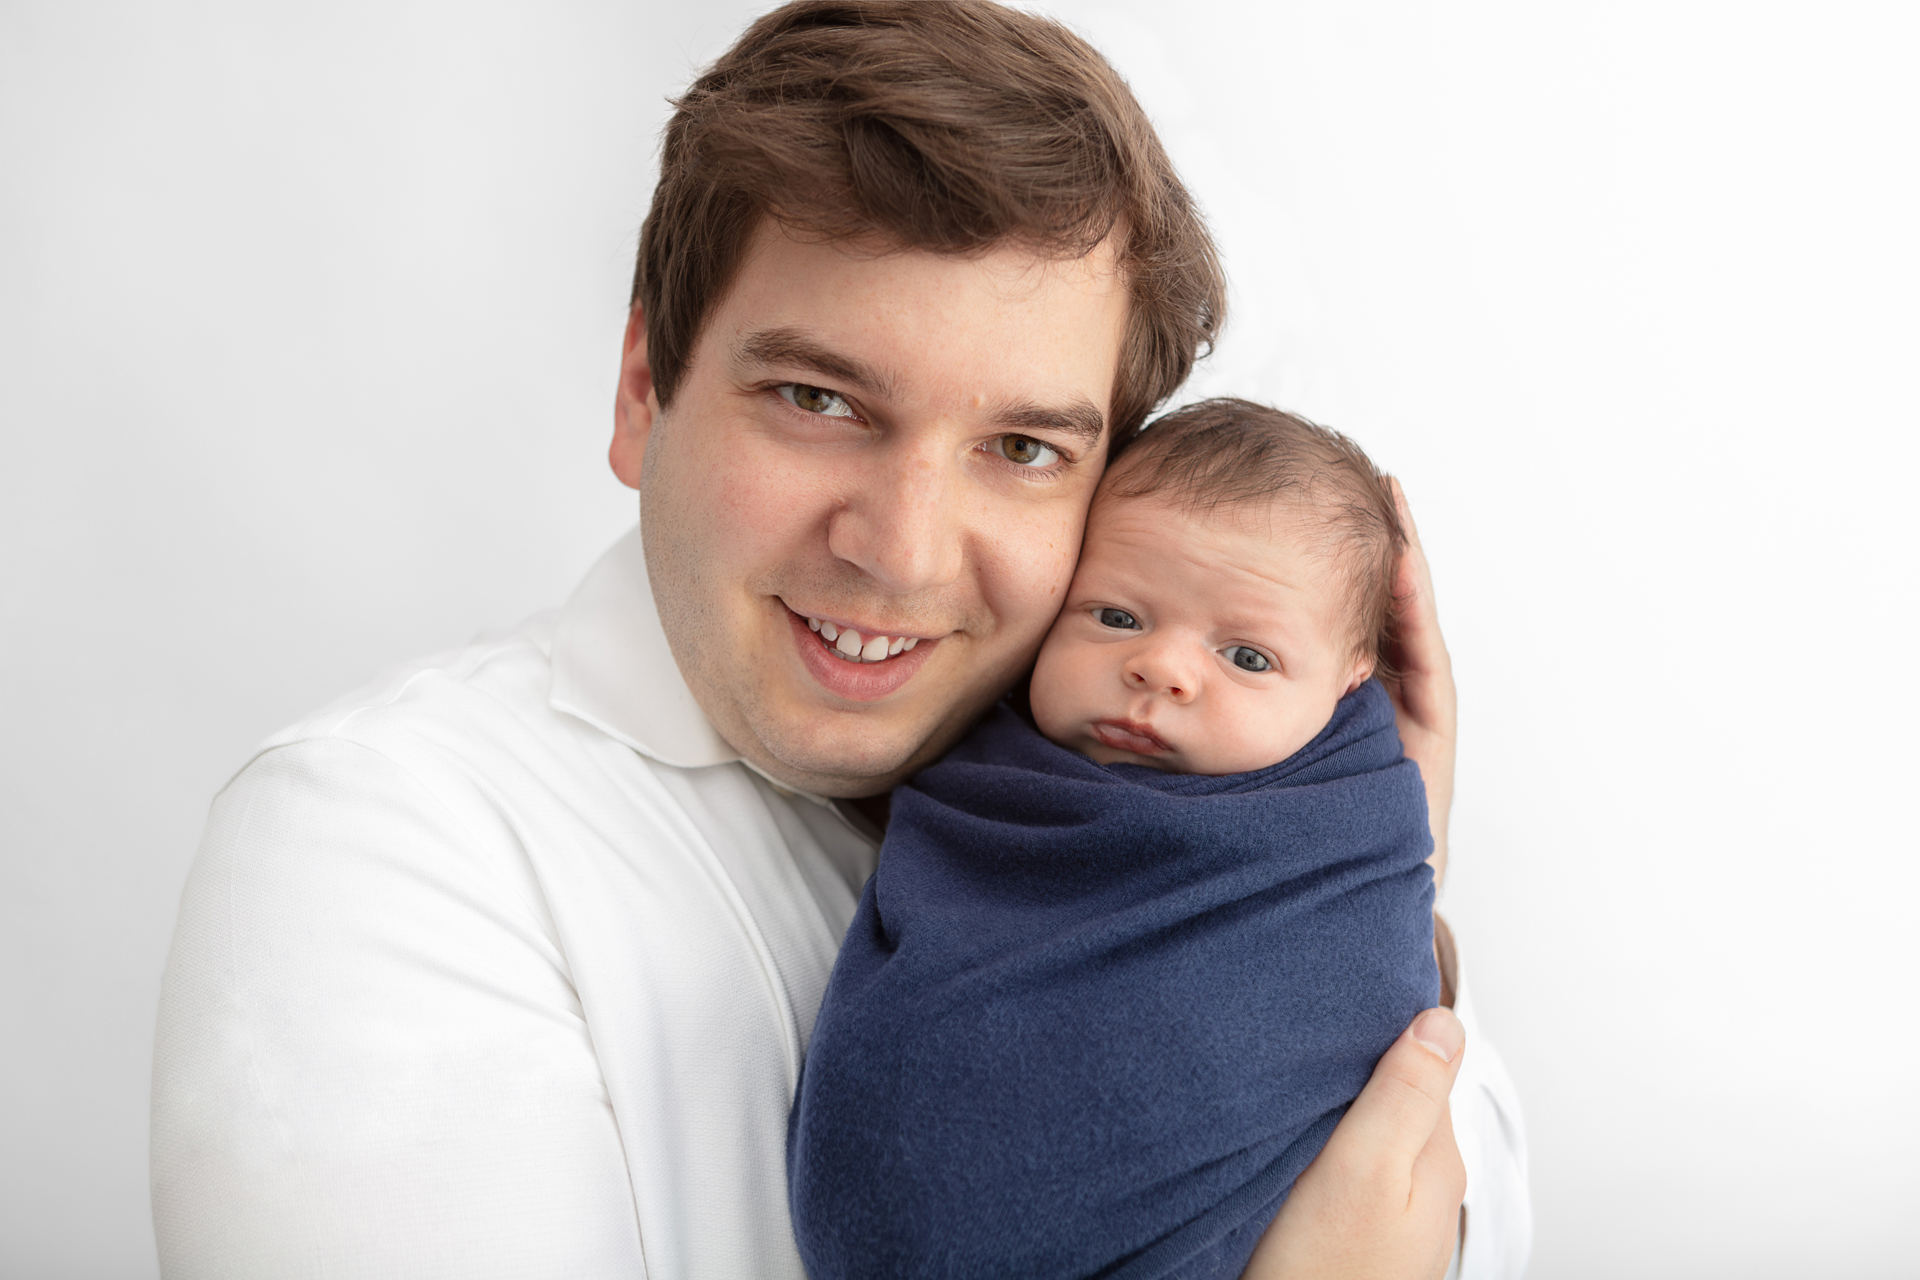 dad holding his newborn son close to his face; the baby is wrapped in a navy colored swaddle blanket